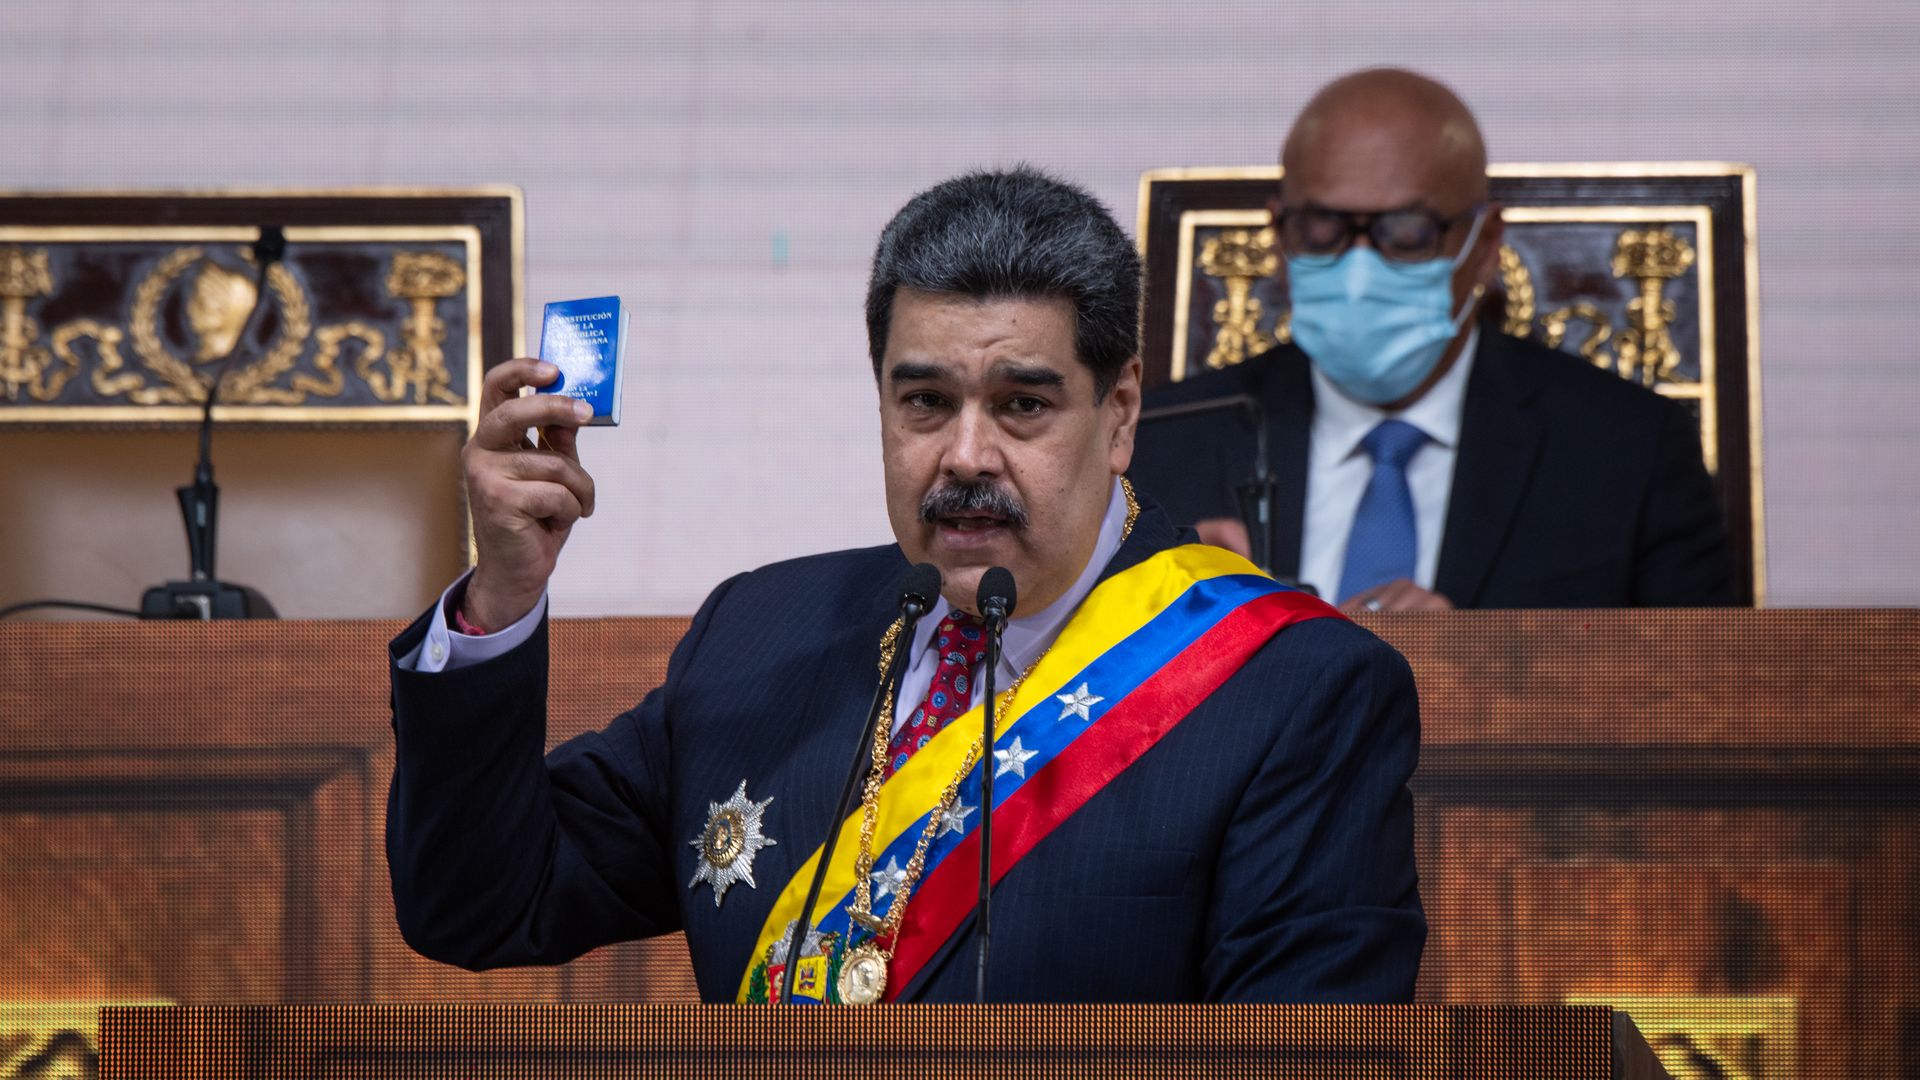 Nicolas Maduro, Venezuela's president, delivers a State of the Union address at the National Assembly in Caracas, Venezuela, on Saturday, Jan. 15, 2022.